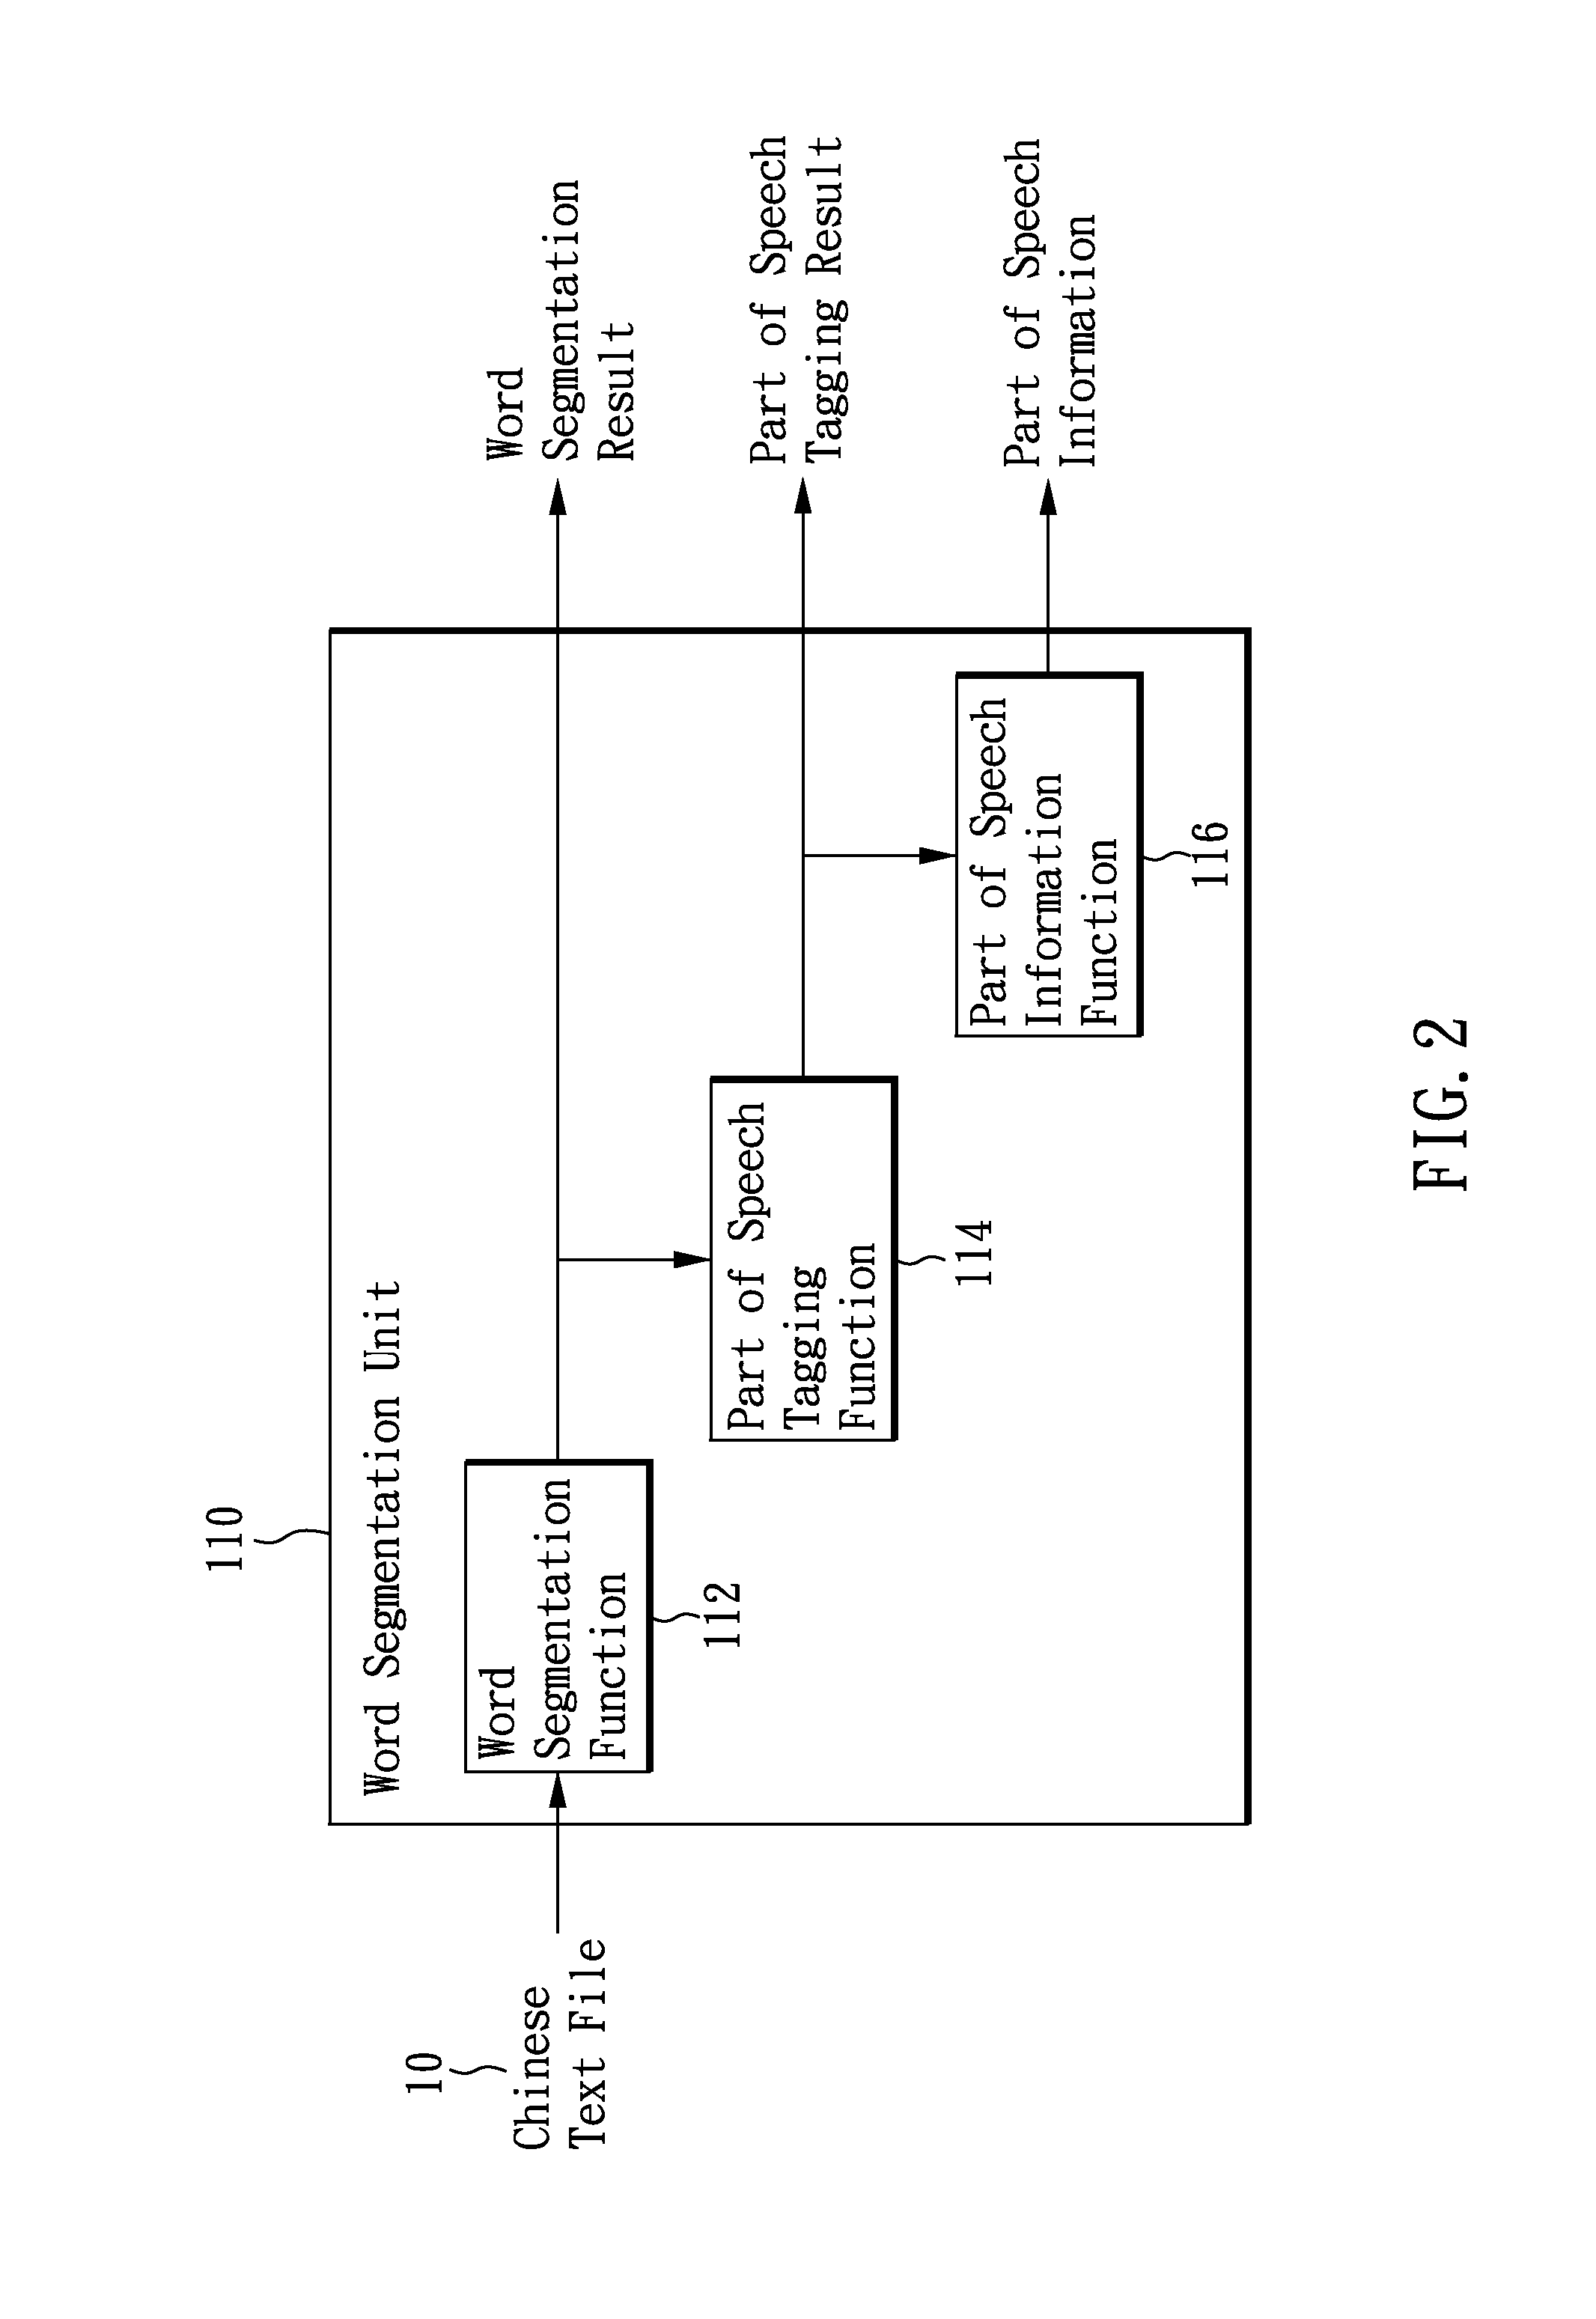 System and Method Using Data Reduction Approach and Nonlinear Algorithm to Construct Chinese Readability Model